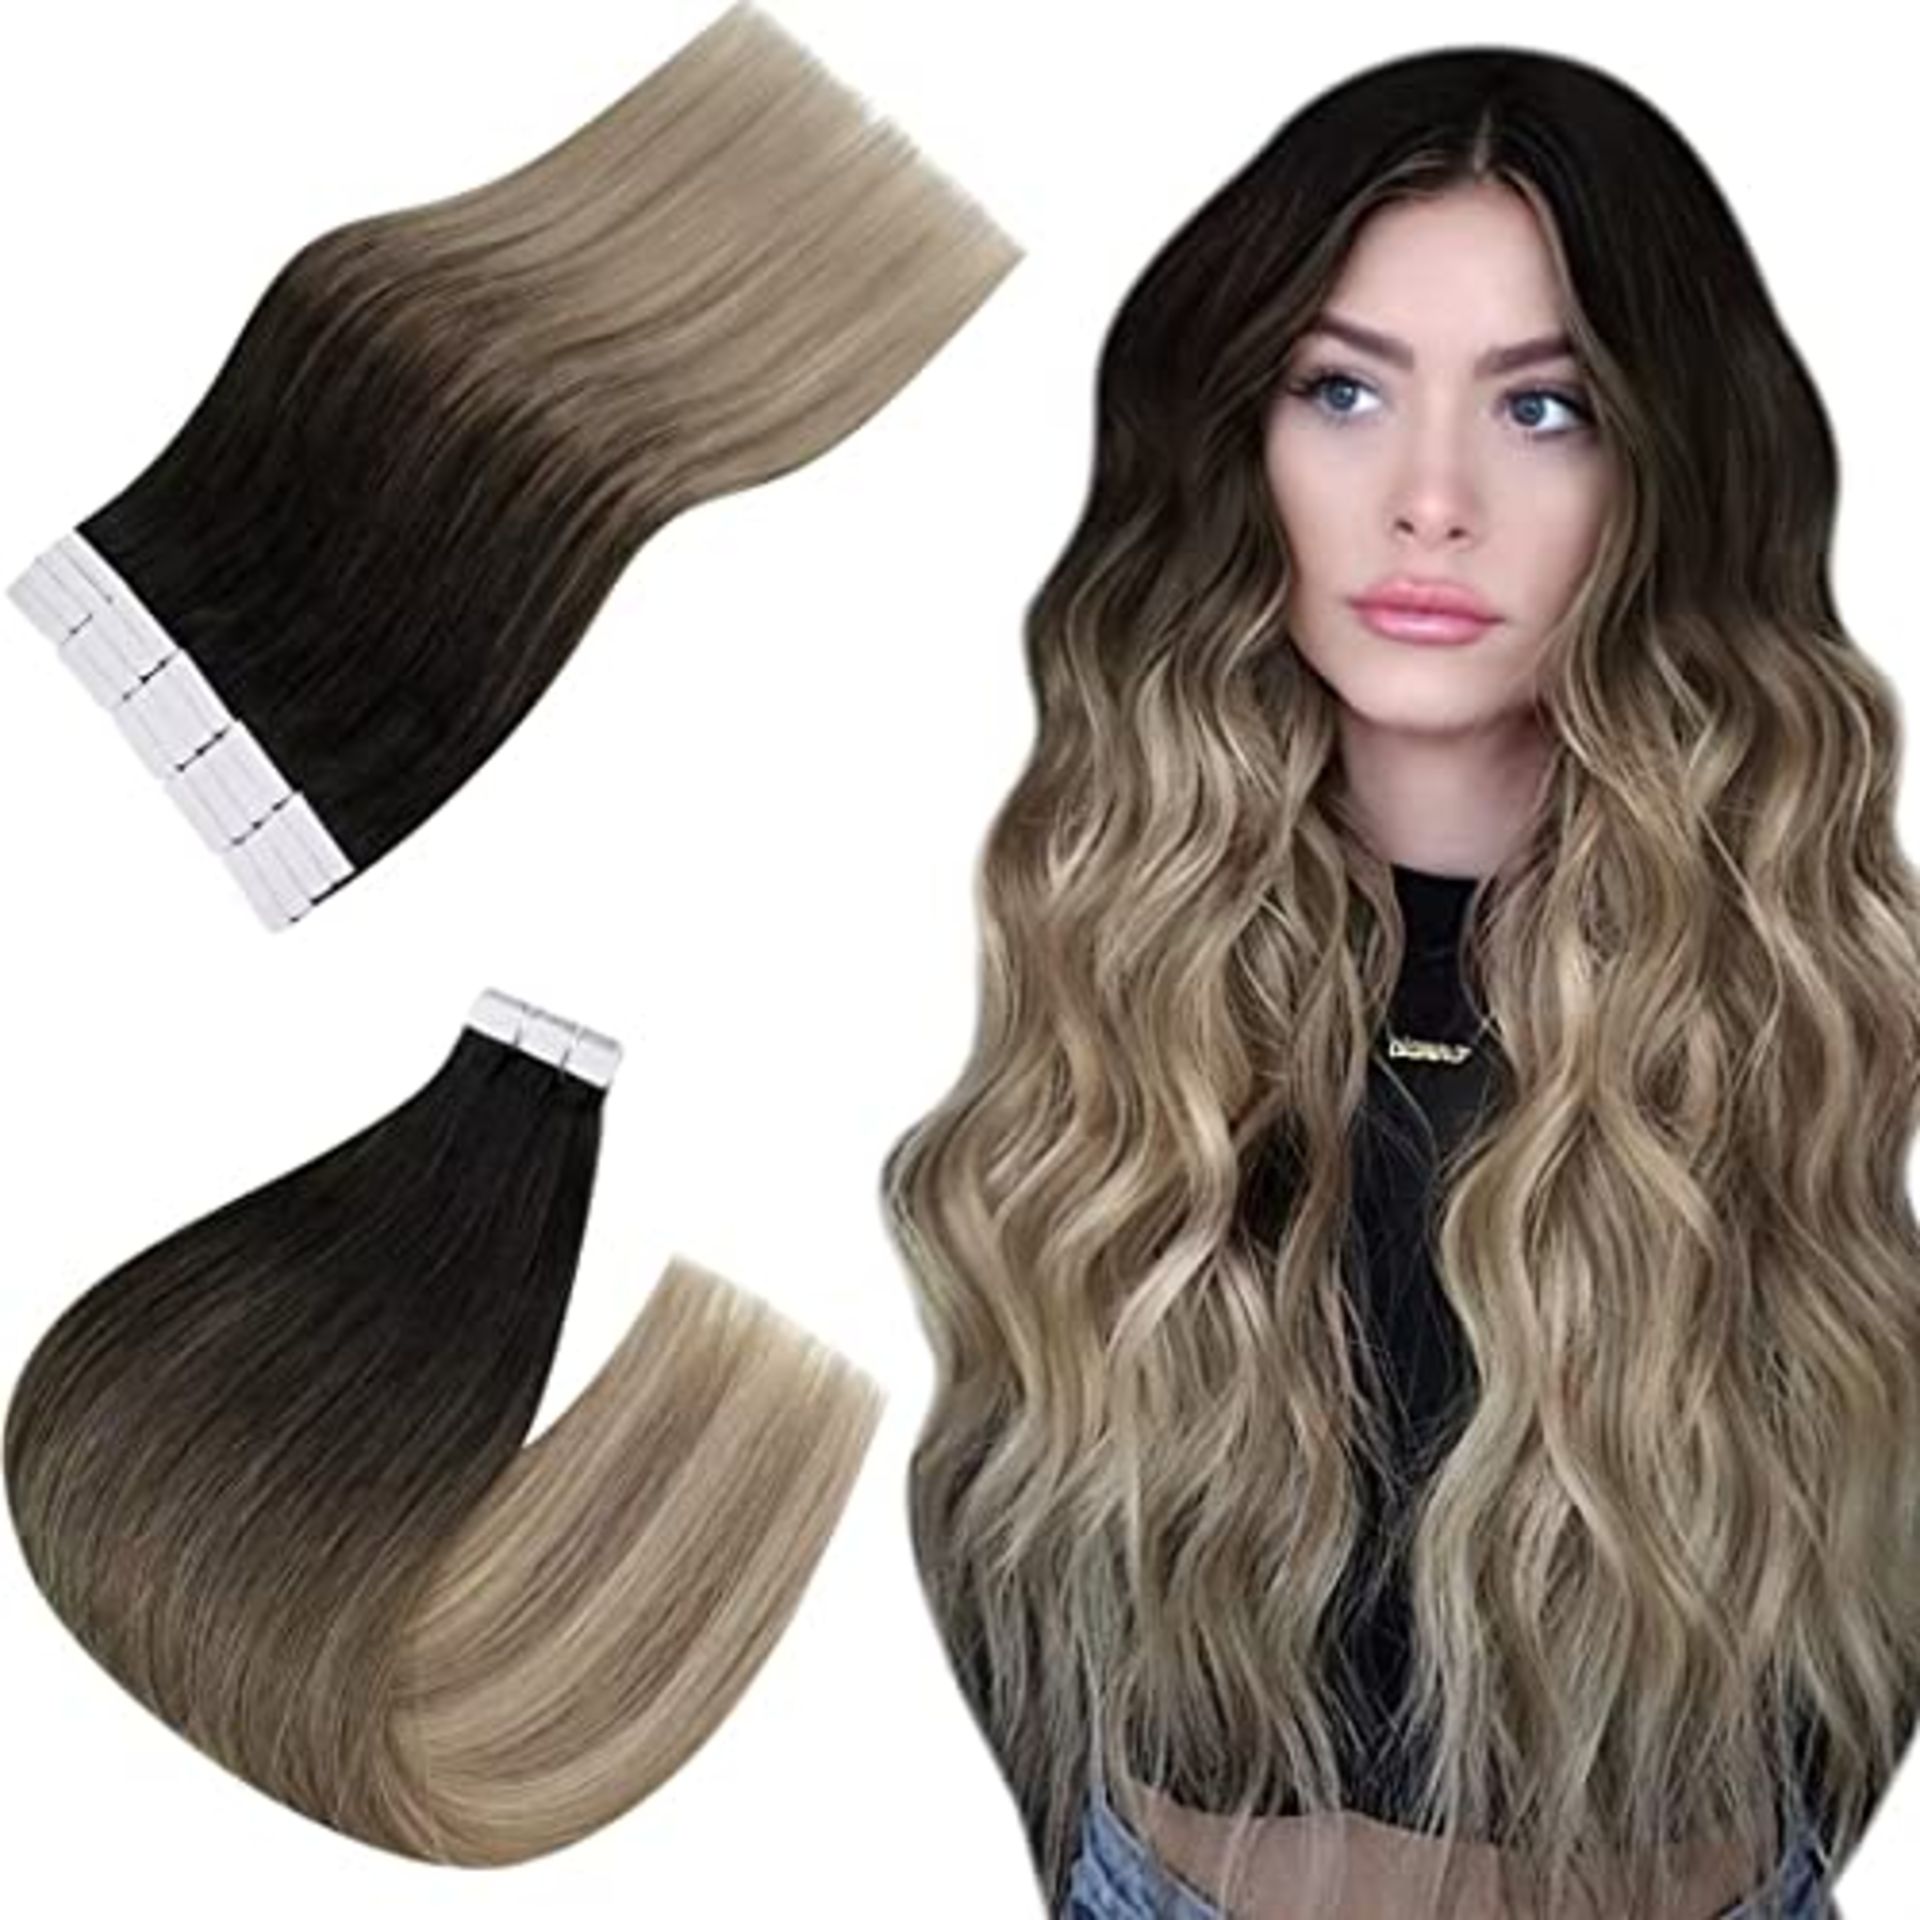 RRP £58.89 Easyouth Real Hair Tape in Extensions Balayage Black - Image 2 of 2